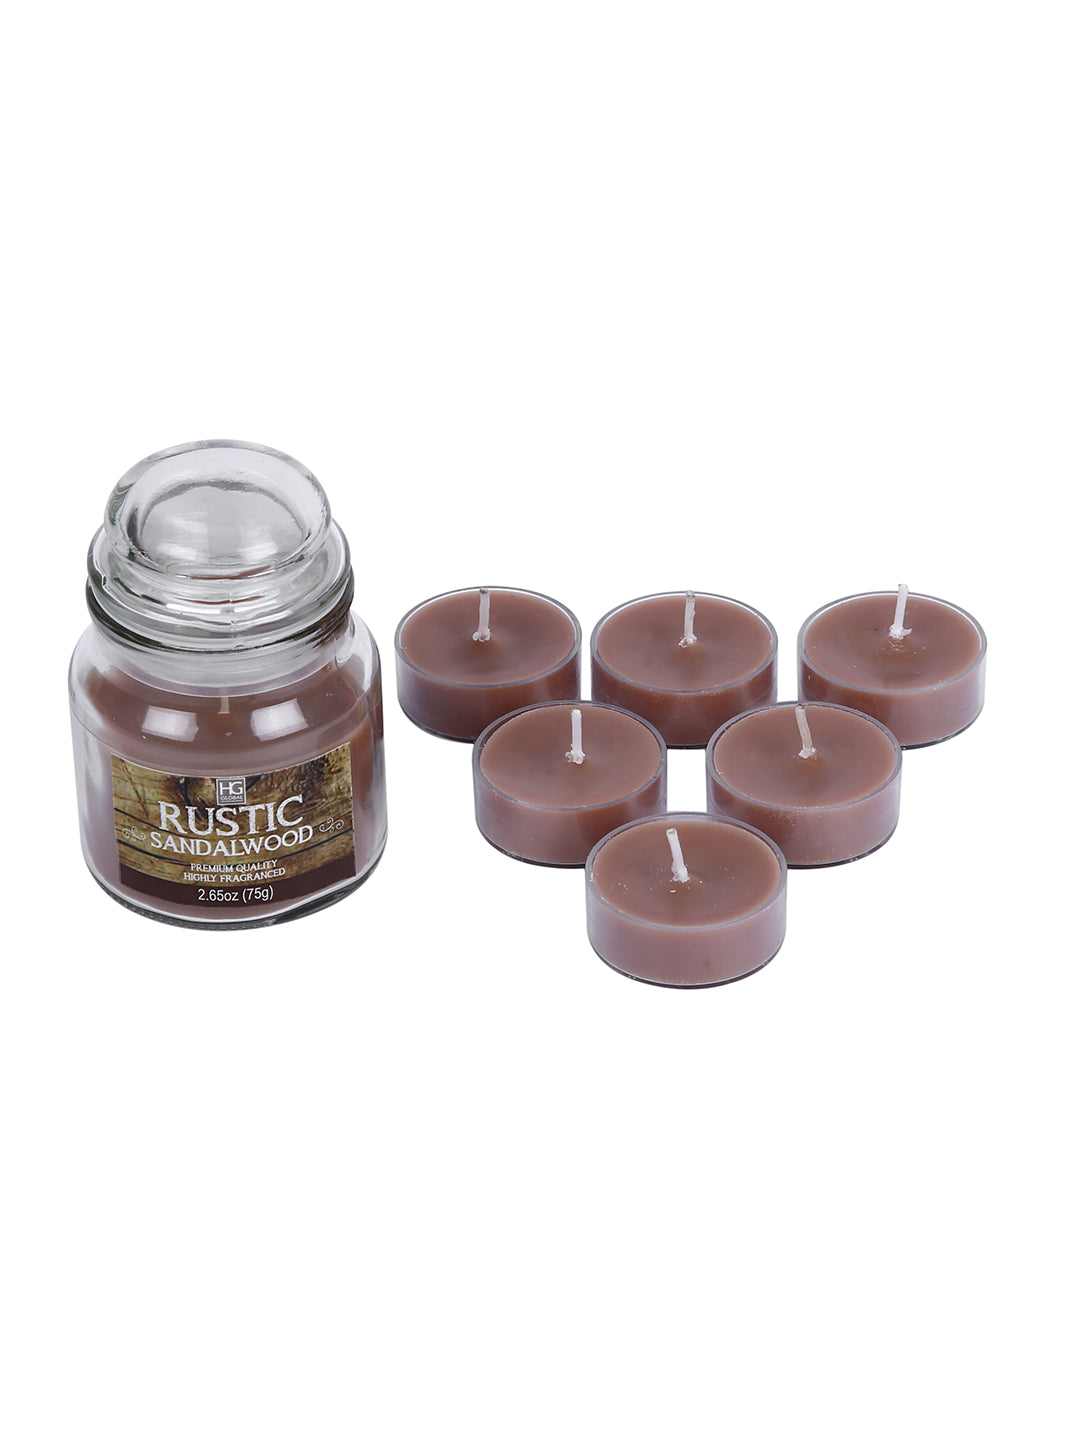 Hosley® Rustic Sandalwood Highly Scented, 2.65 Oz wax, Jar Candle with Pack of 6-Pieces Scented Tealights